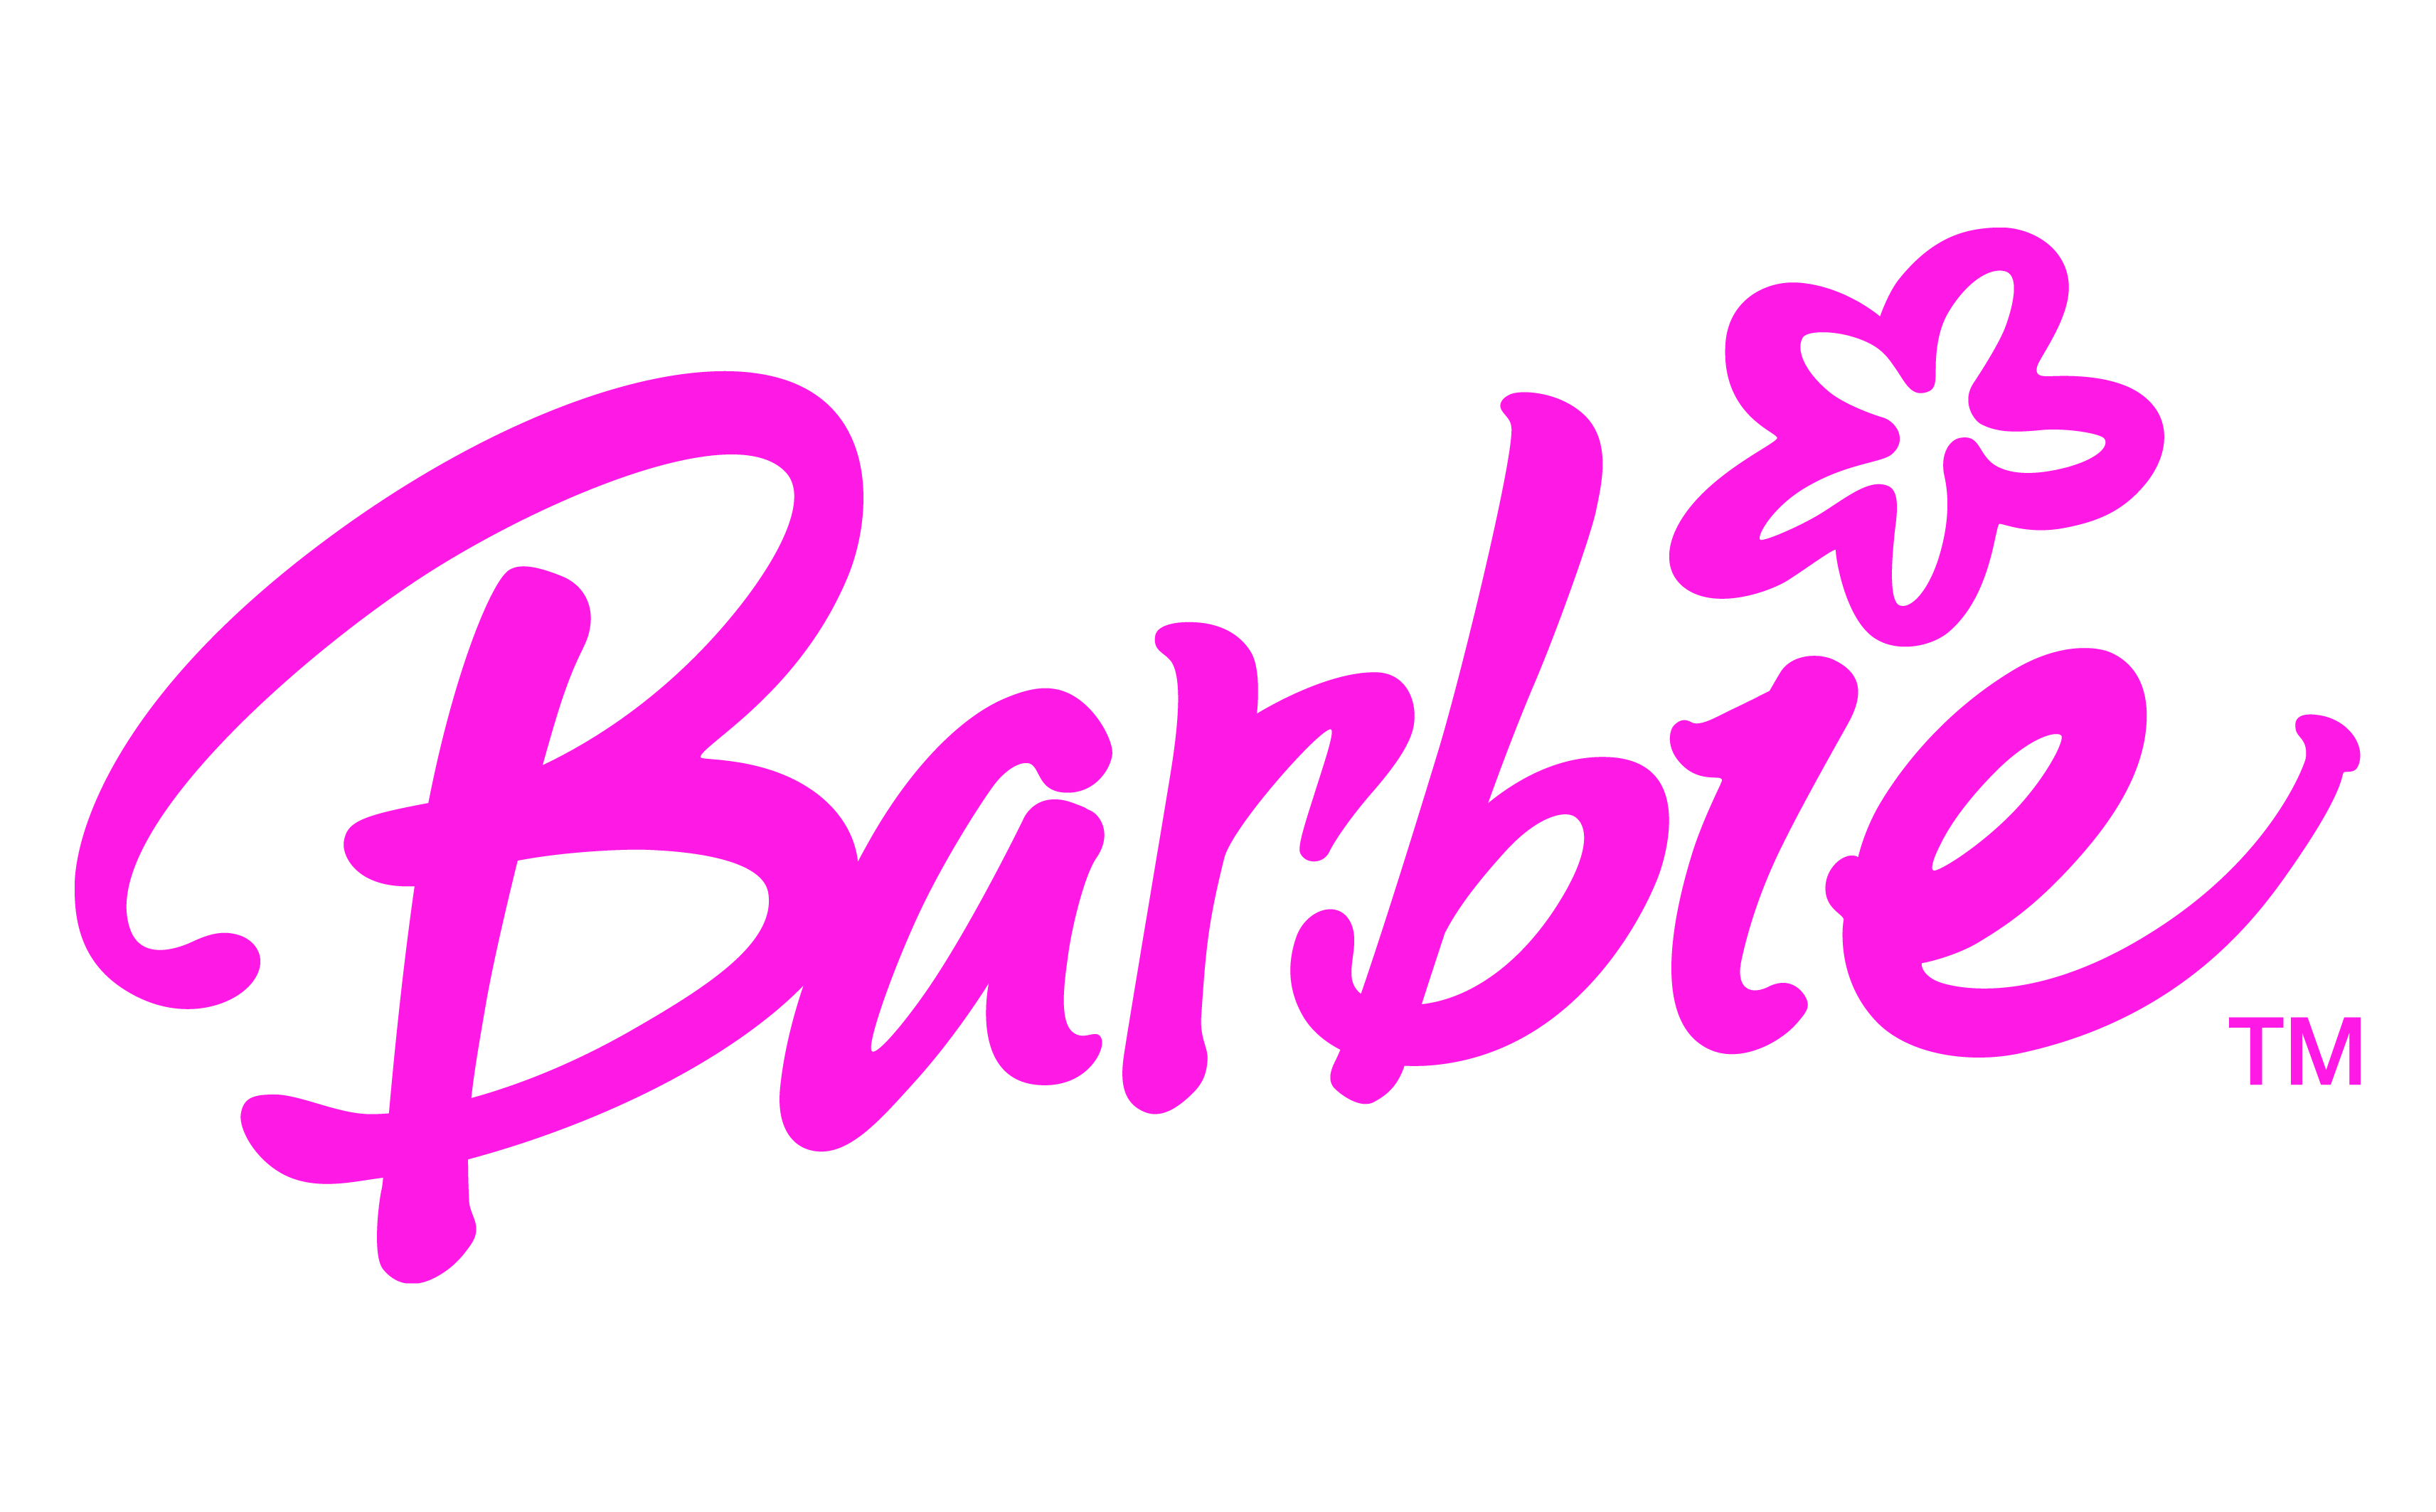 Free barbie logo download free barbie logo png images free cliparts on clipart library